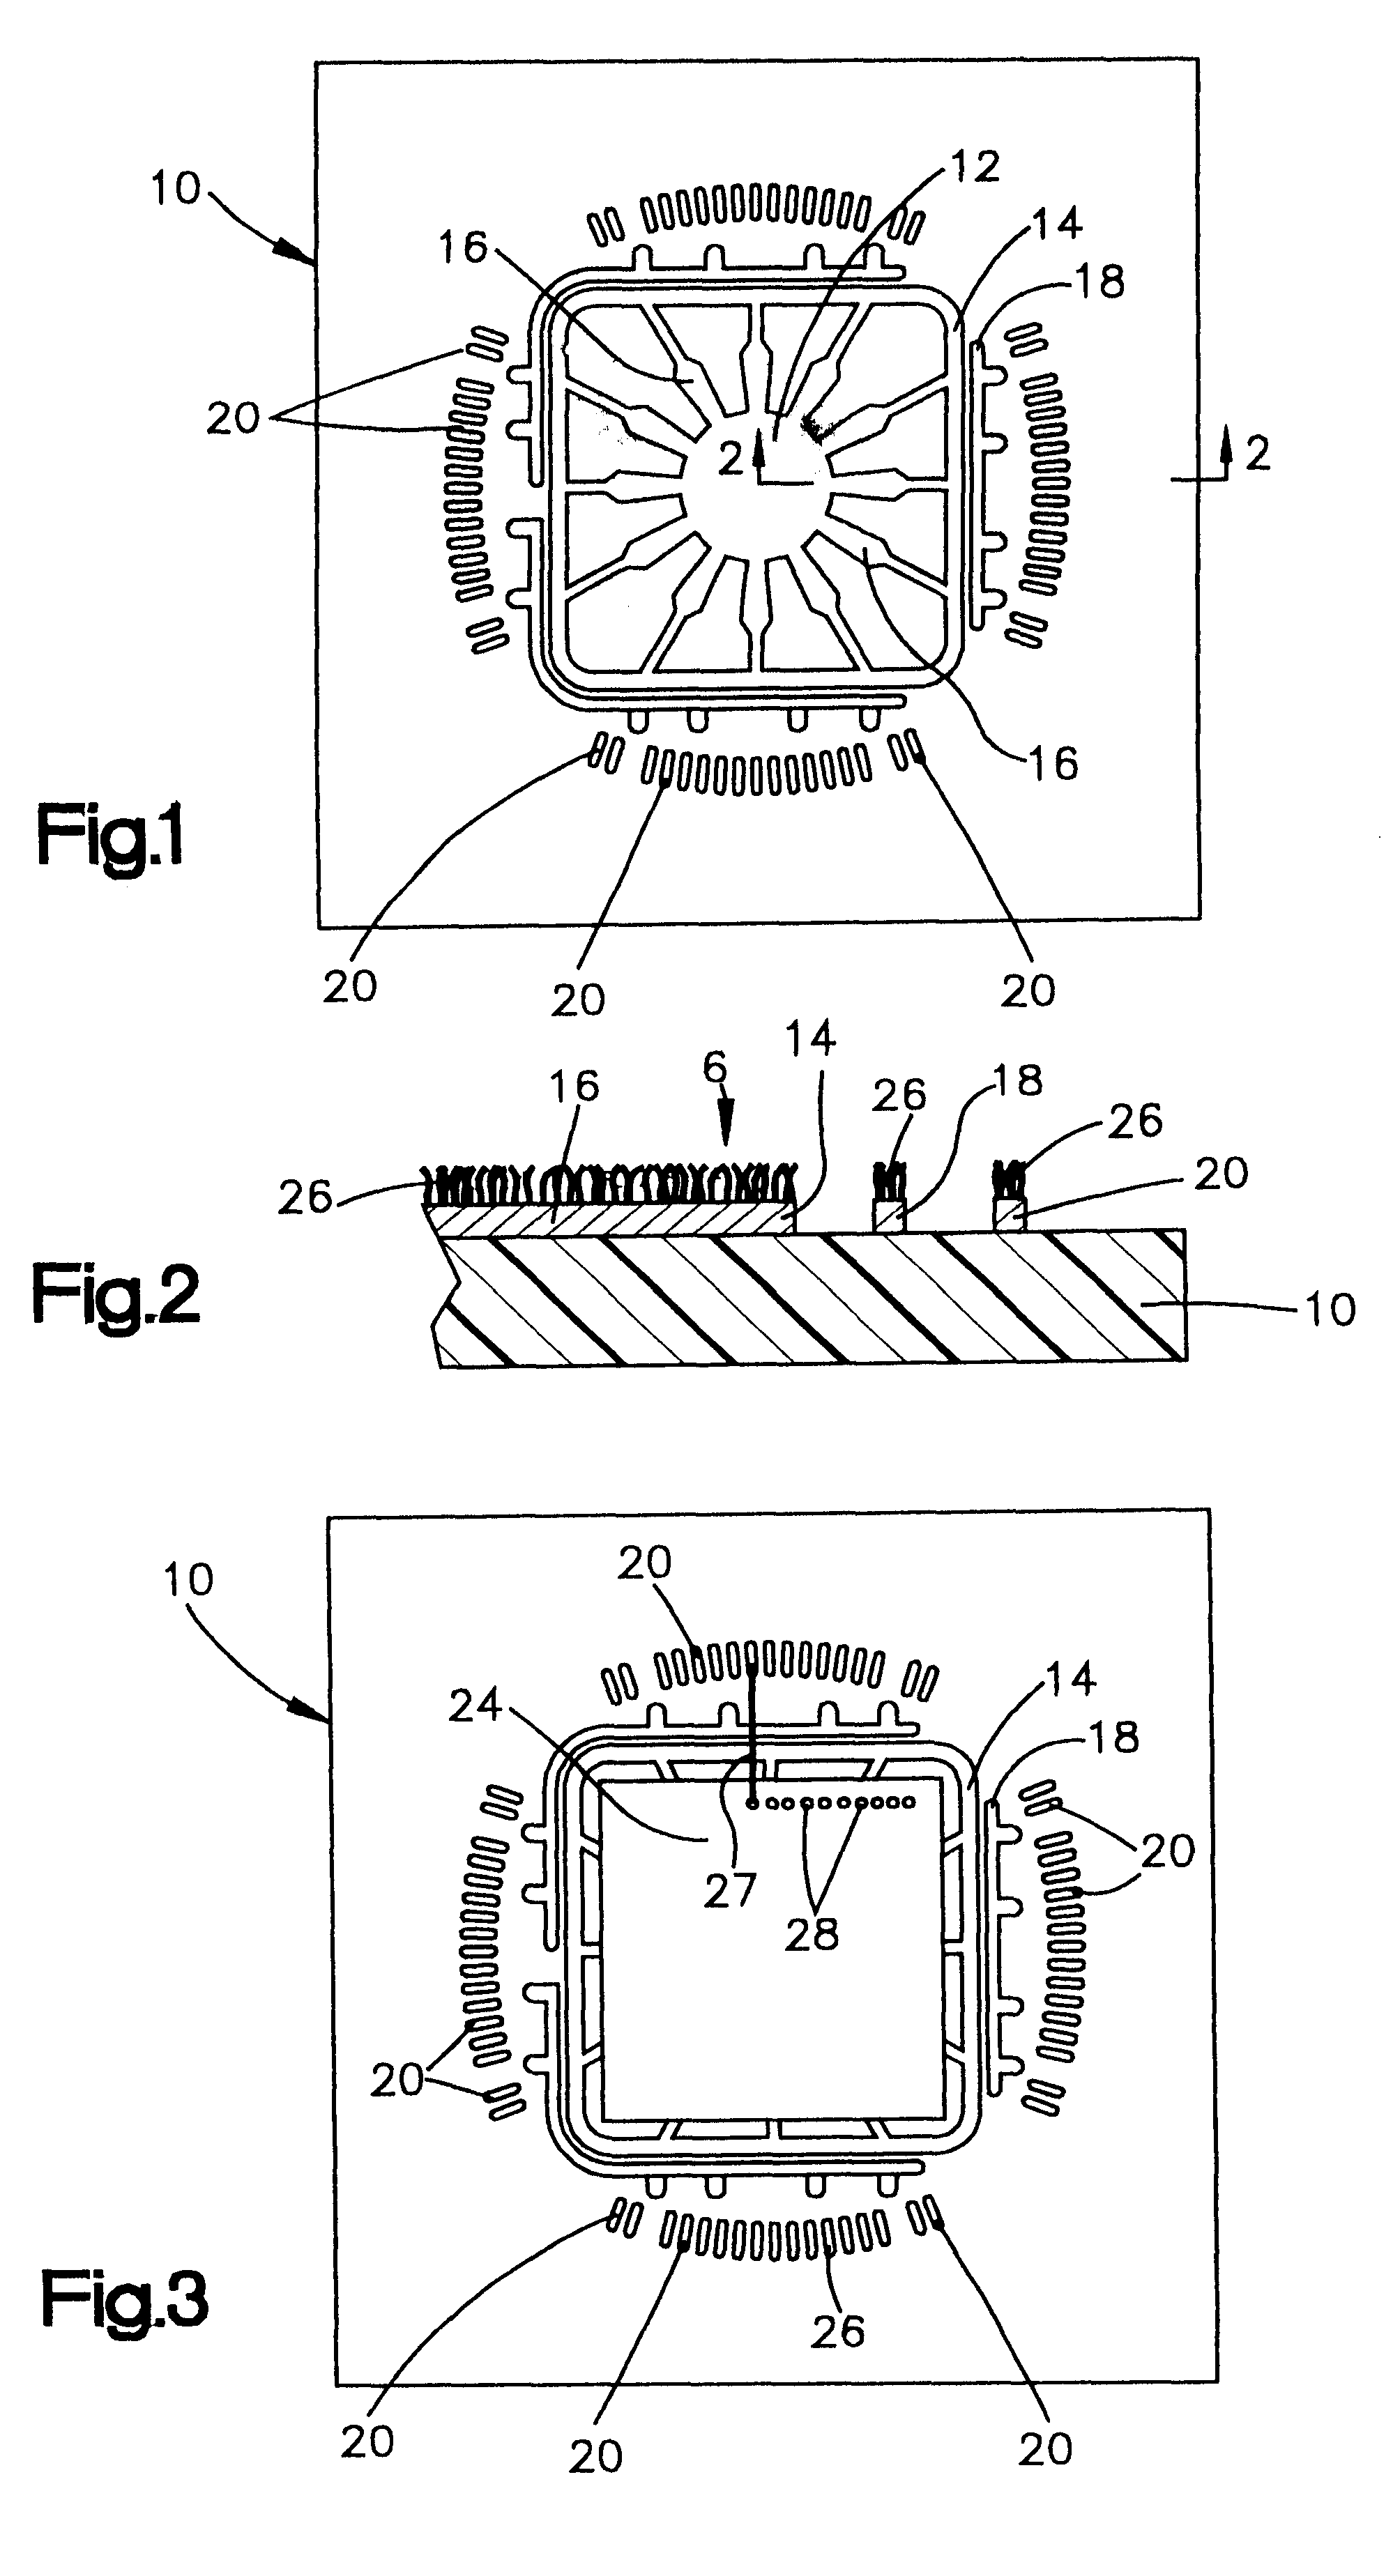 Structure for preventing adhesive bleed onto surfaces